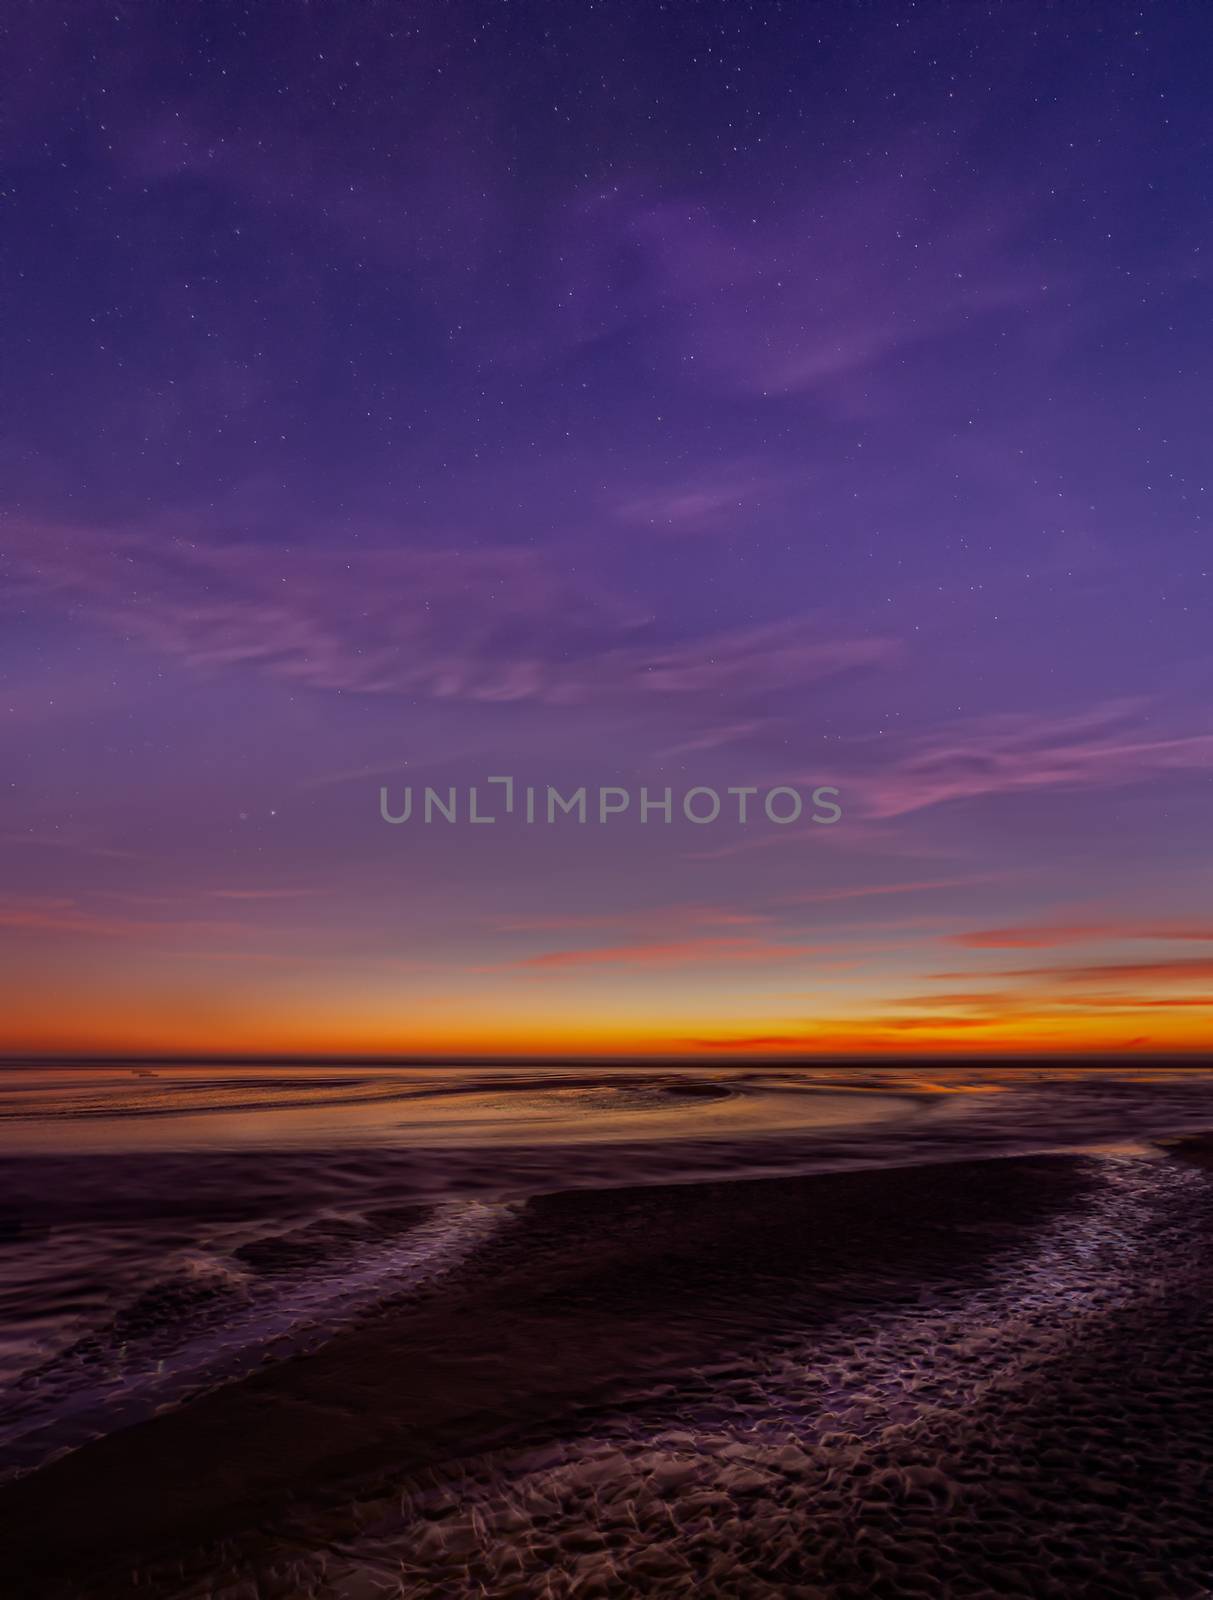 The Night Sky at a Northern California Beach, Humboldt County, California.